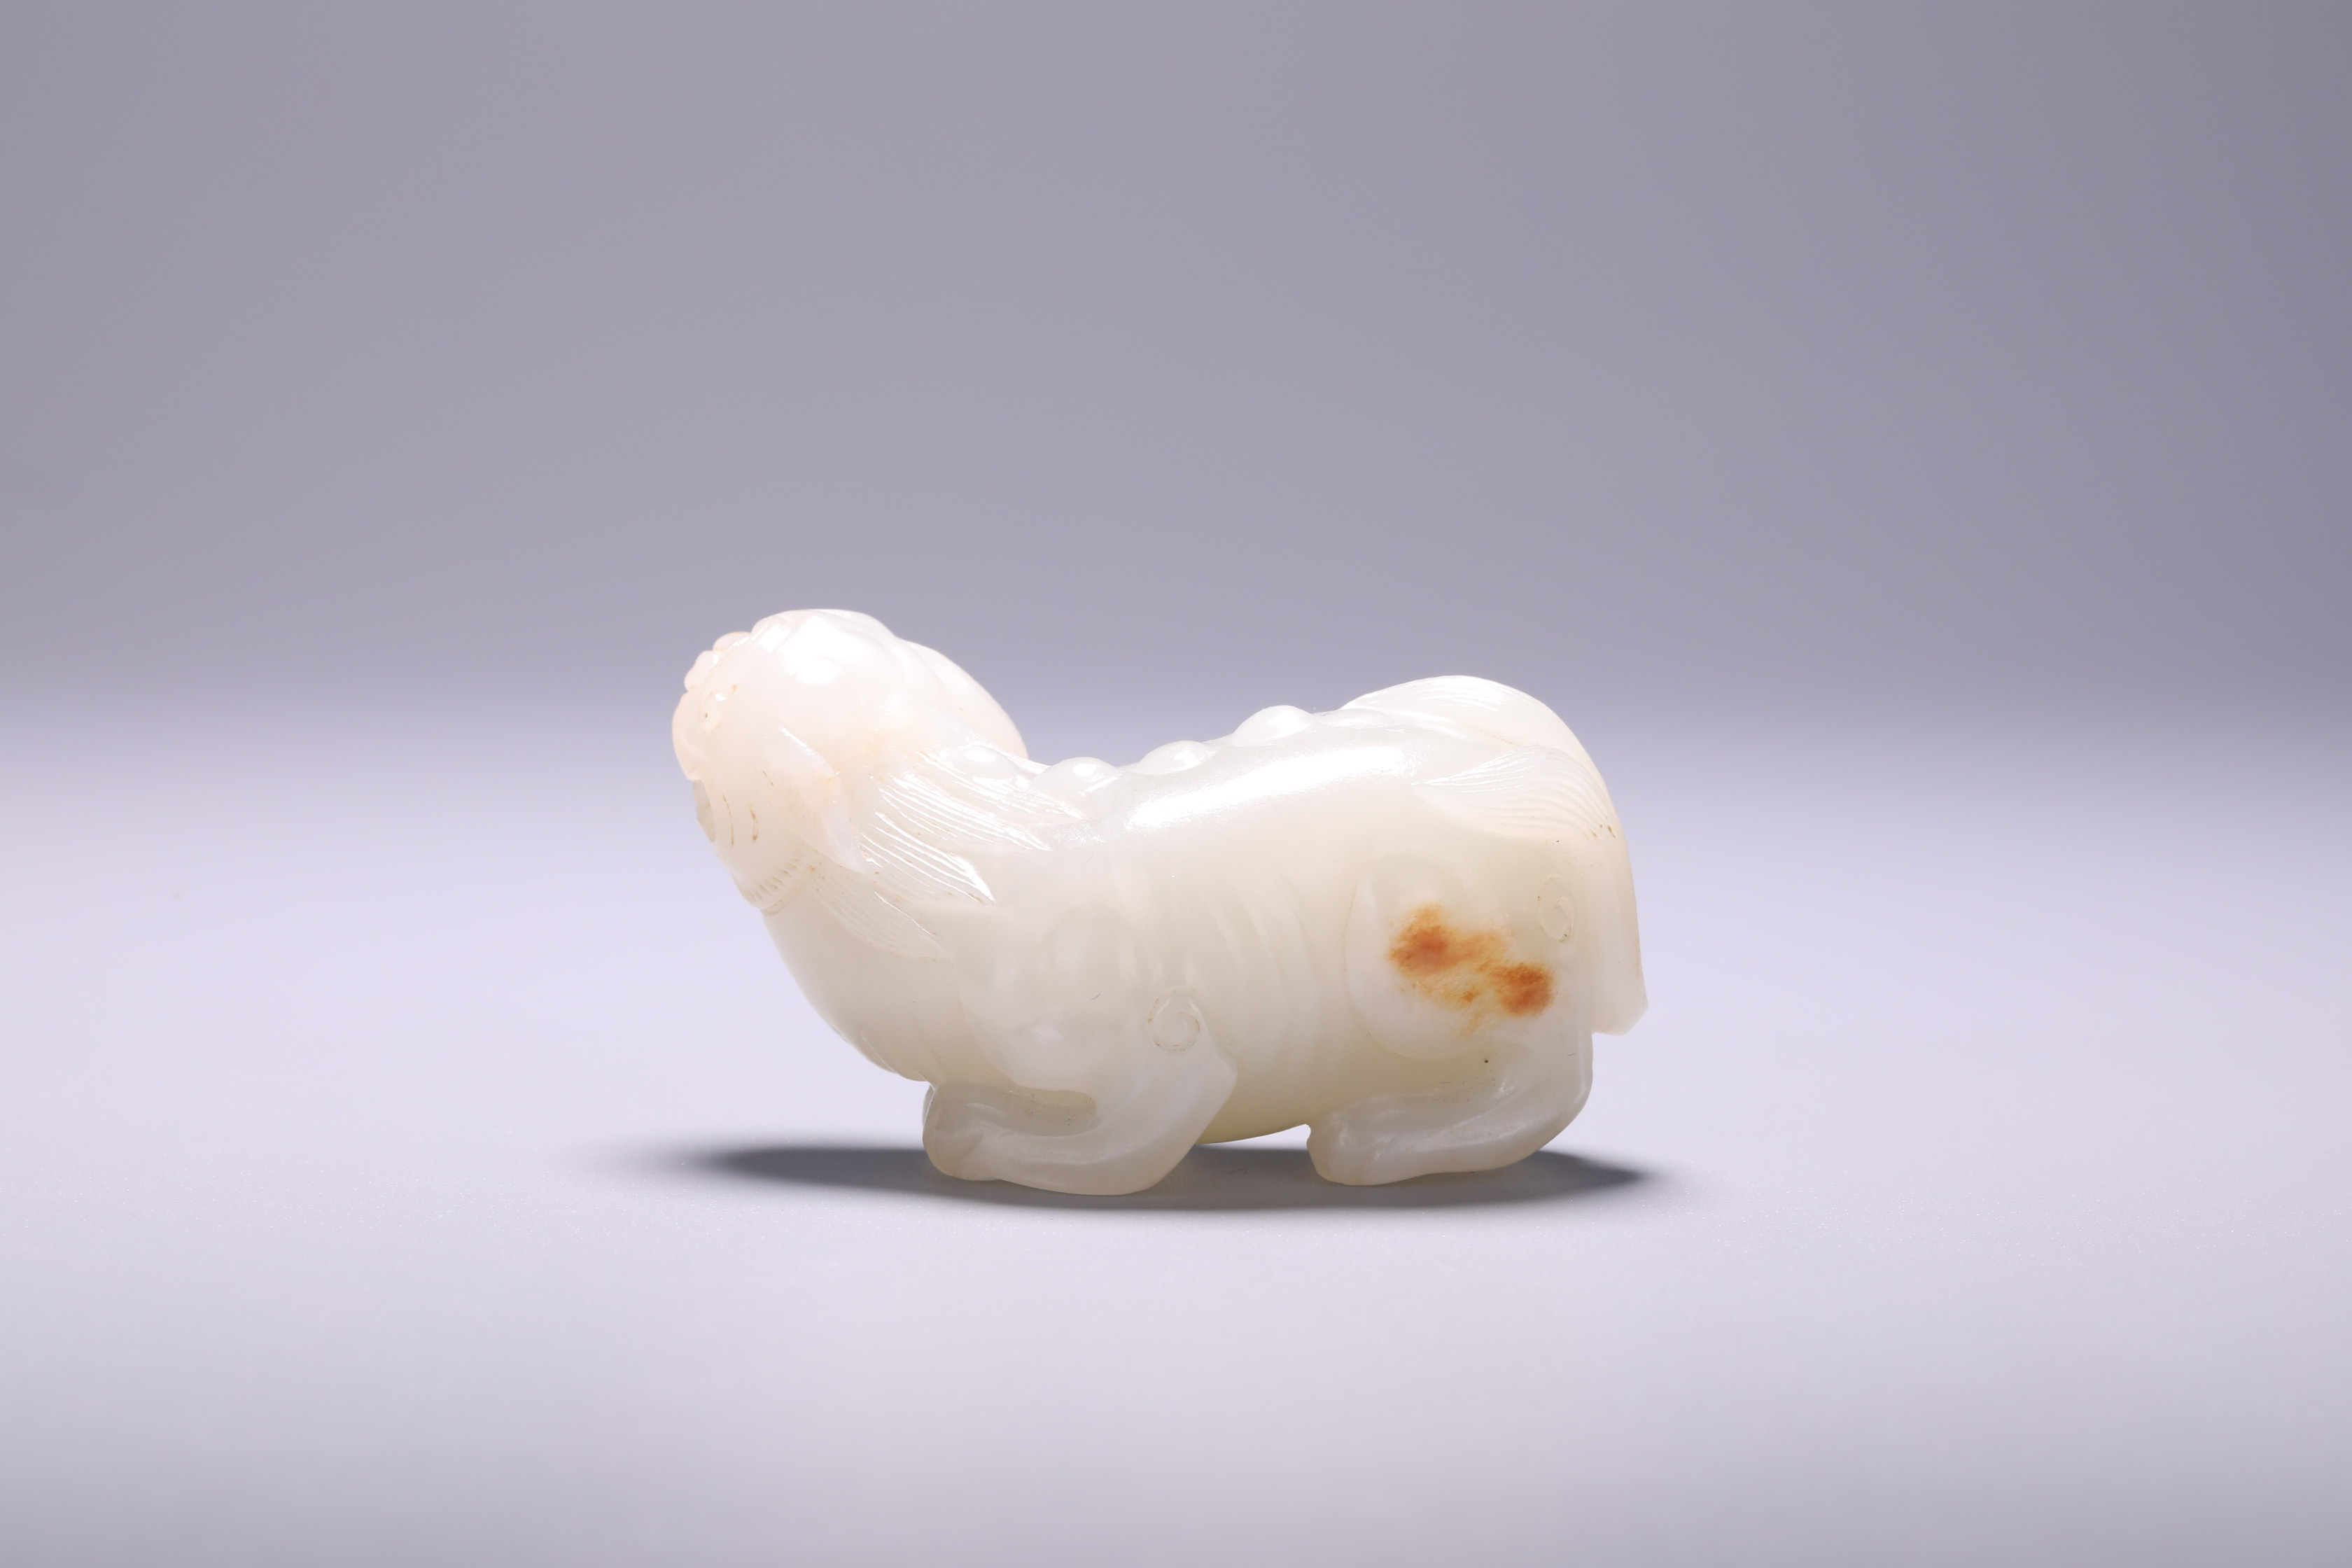 A Chinese jade 'Mythical Beast' carving, L 6,5 - H 3,5 cm - Image 2 of 3